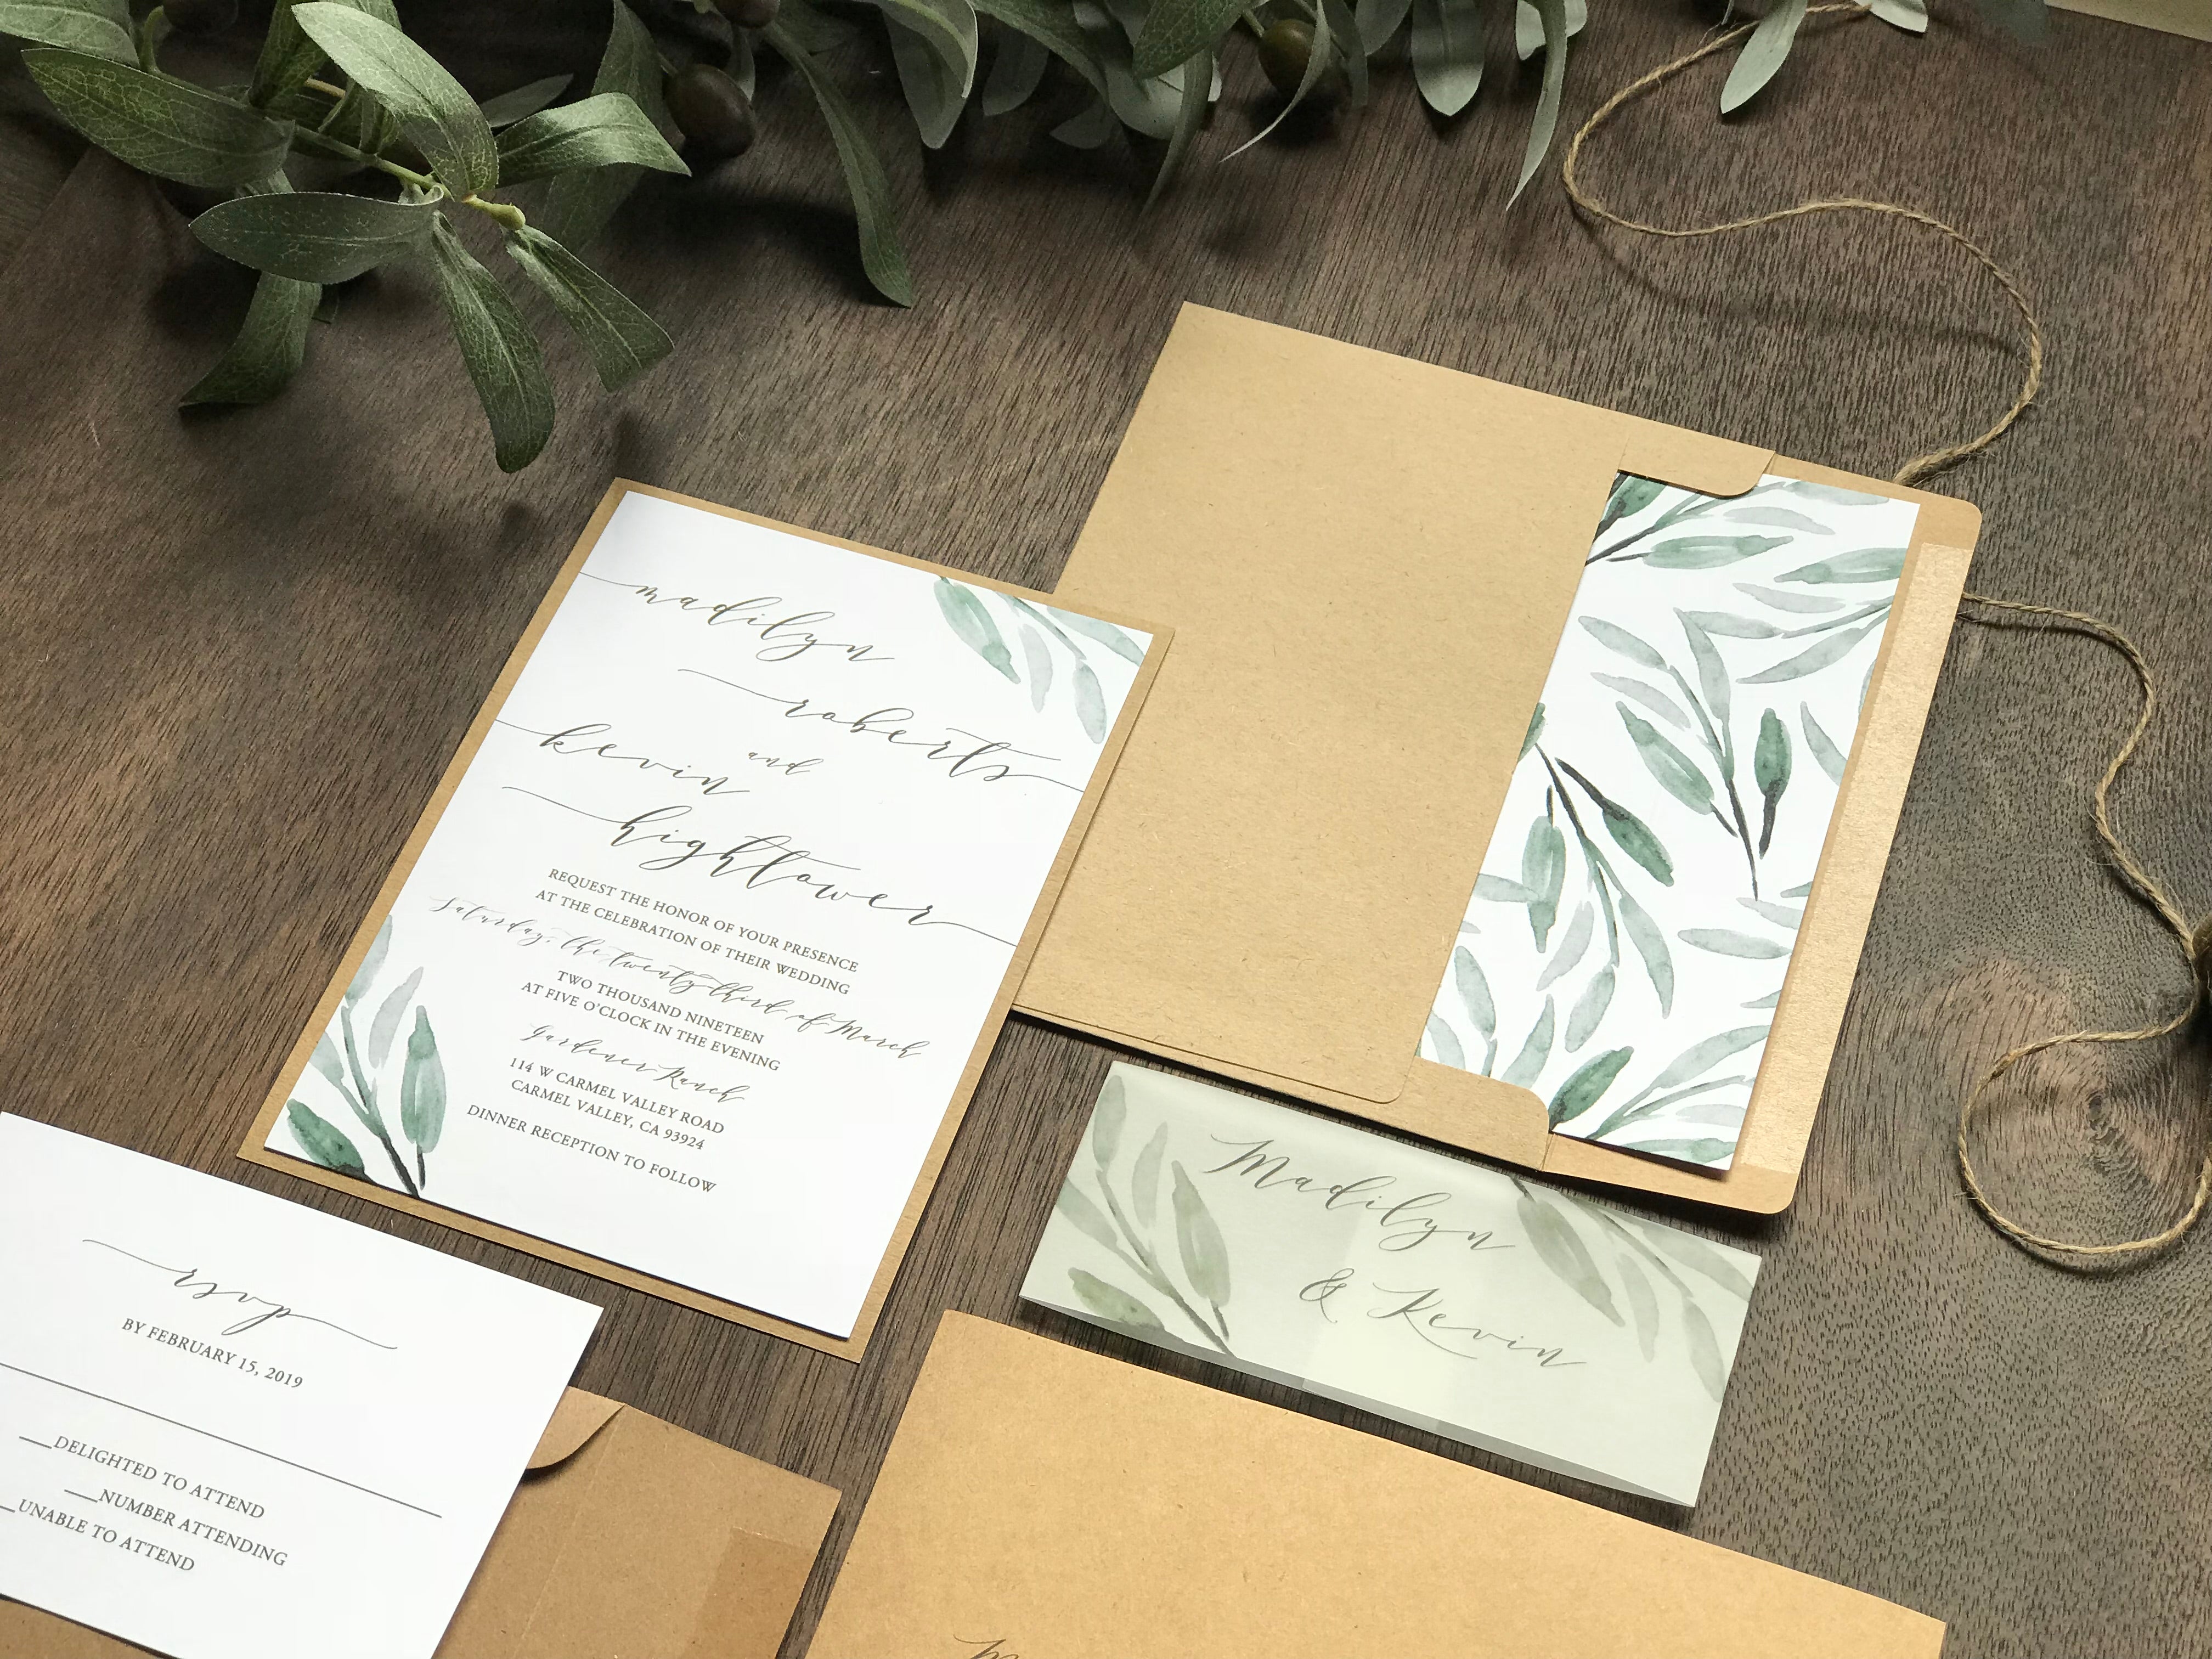 Rustic Greenery Wedding Invitation with Vellum belly band